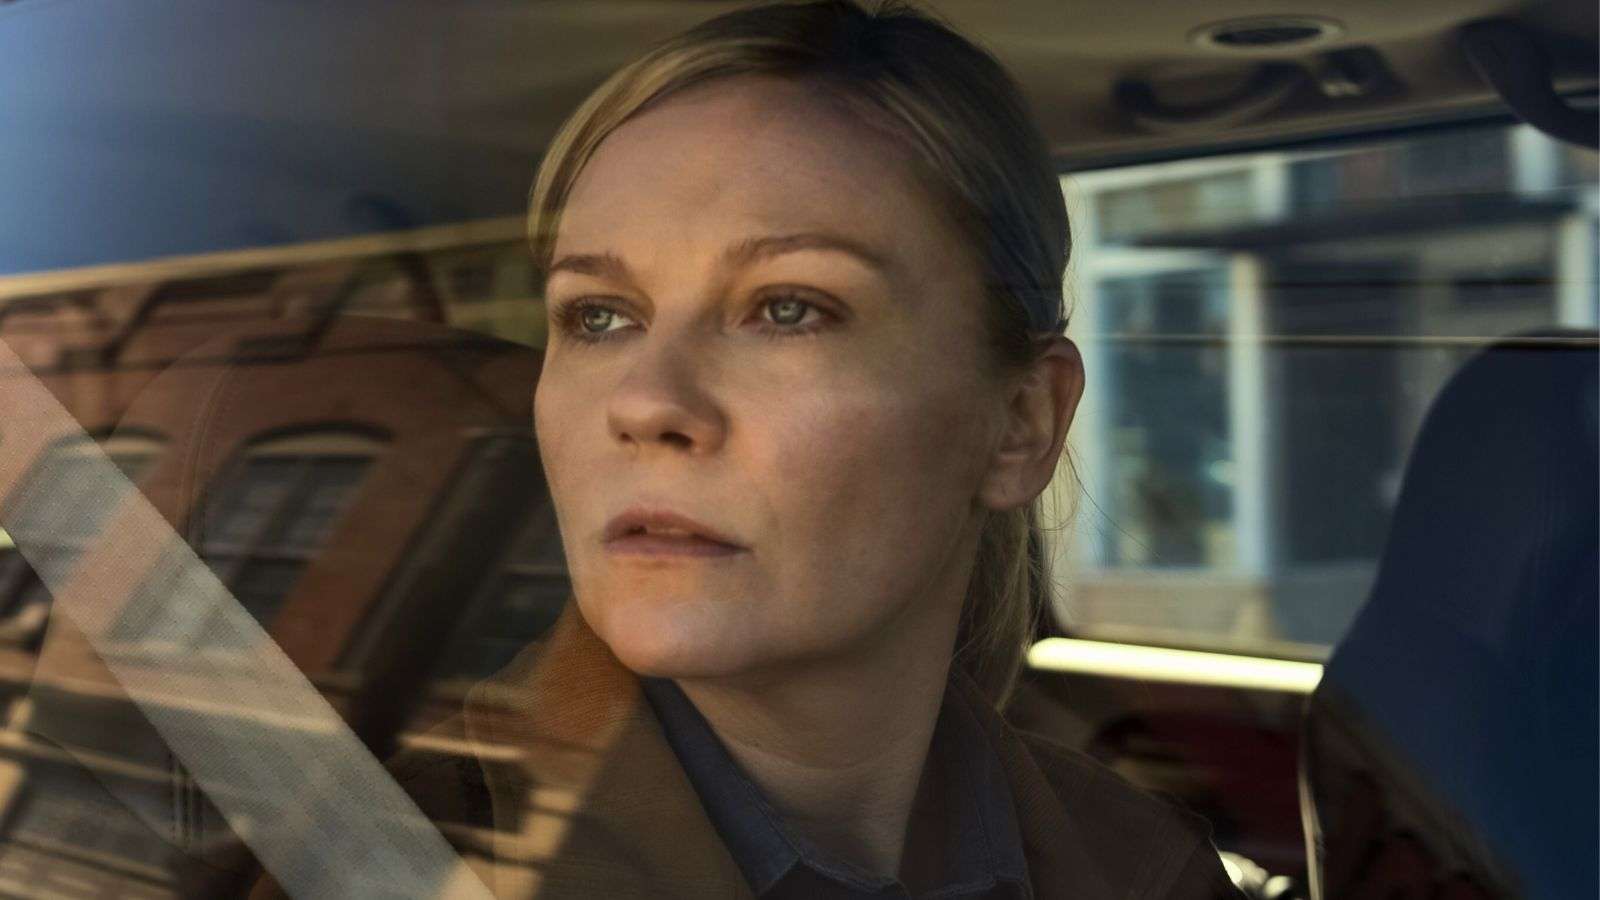 Kirsten Dunst in Civil War rides in the passenger seat of a car while looking out the window at buildings.